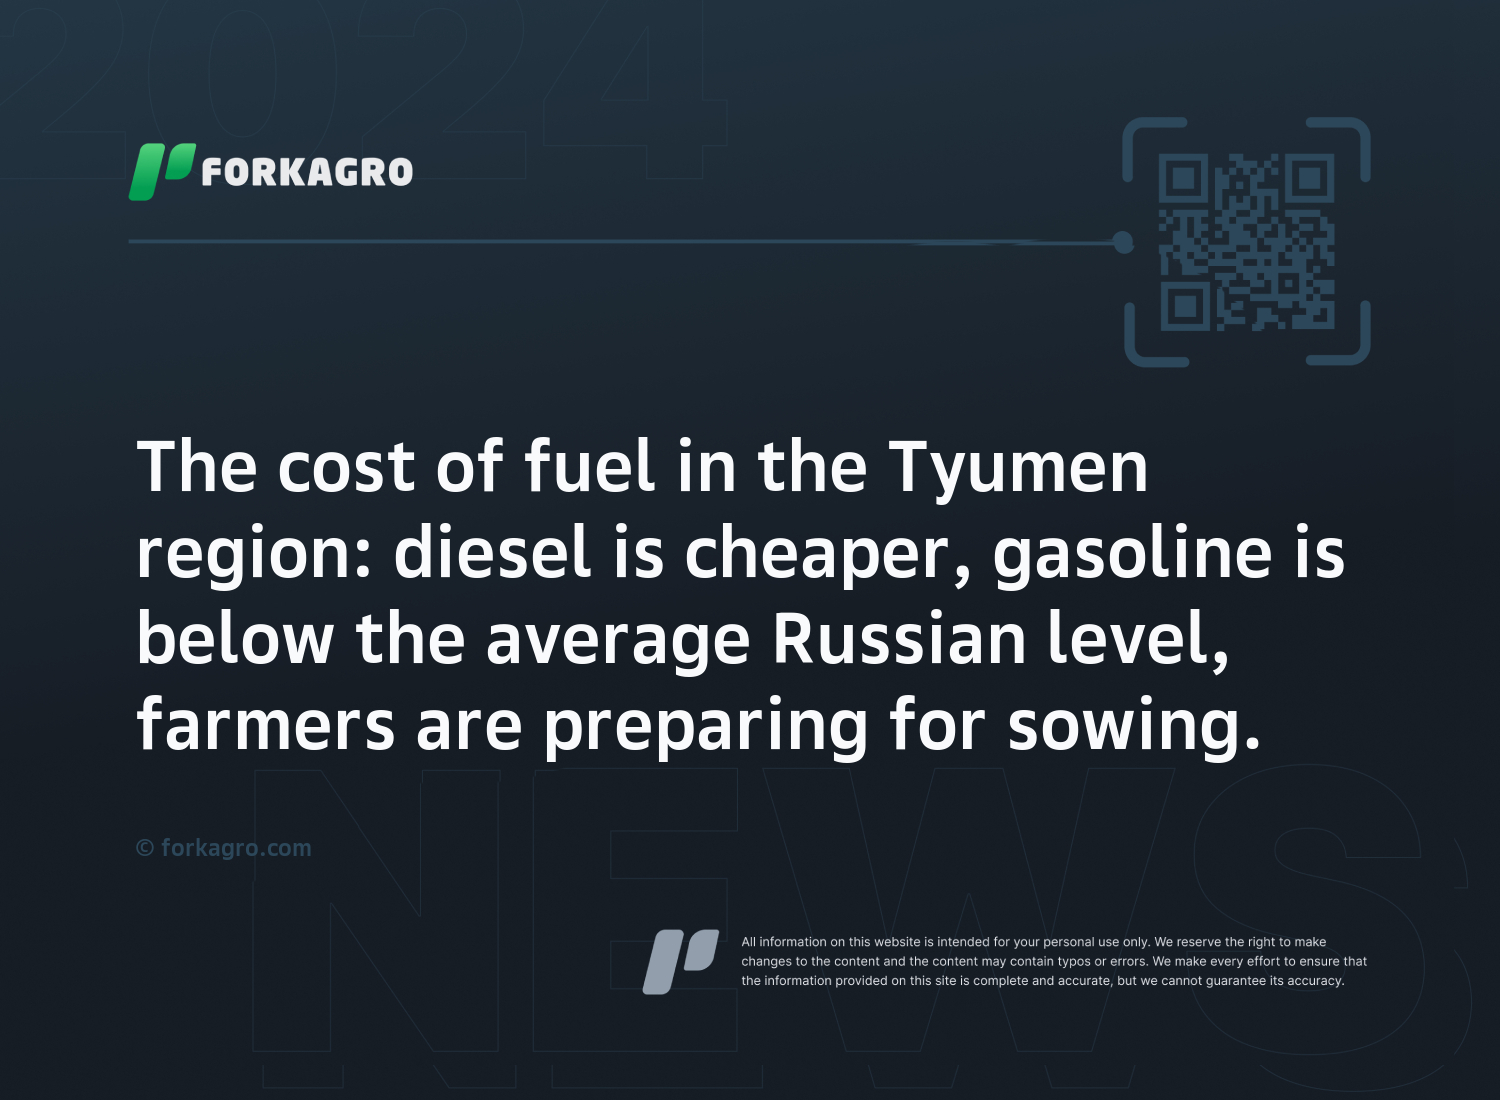 The cost of fuel in the Tyumen region: diesel is cheaper, gasoline is below the average Russian level, farmers are preparing for sowing.